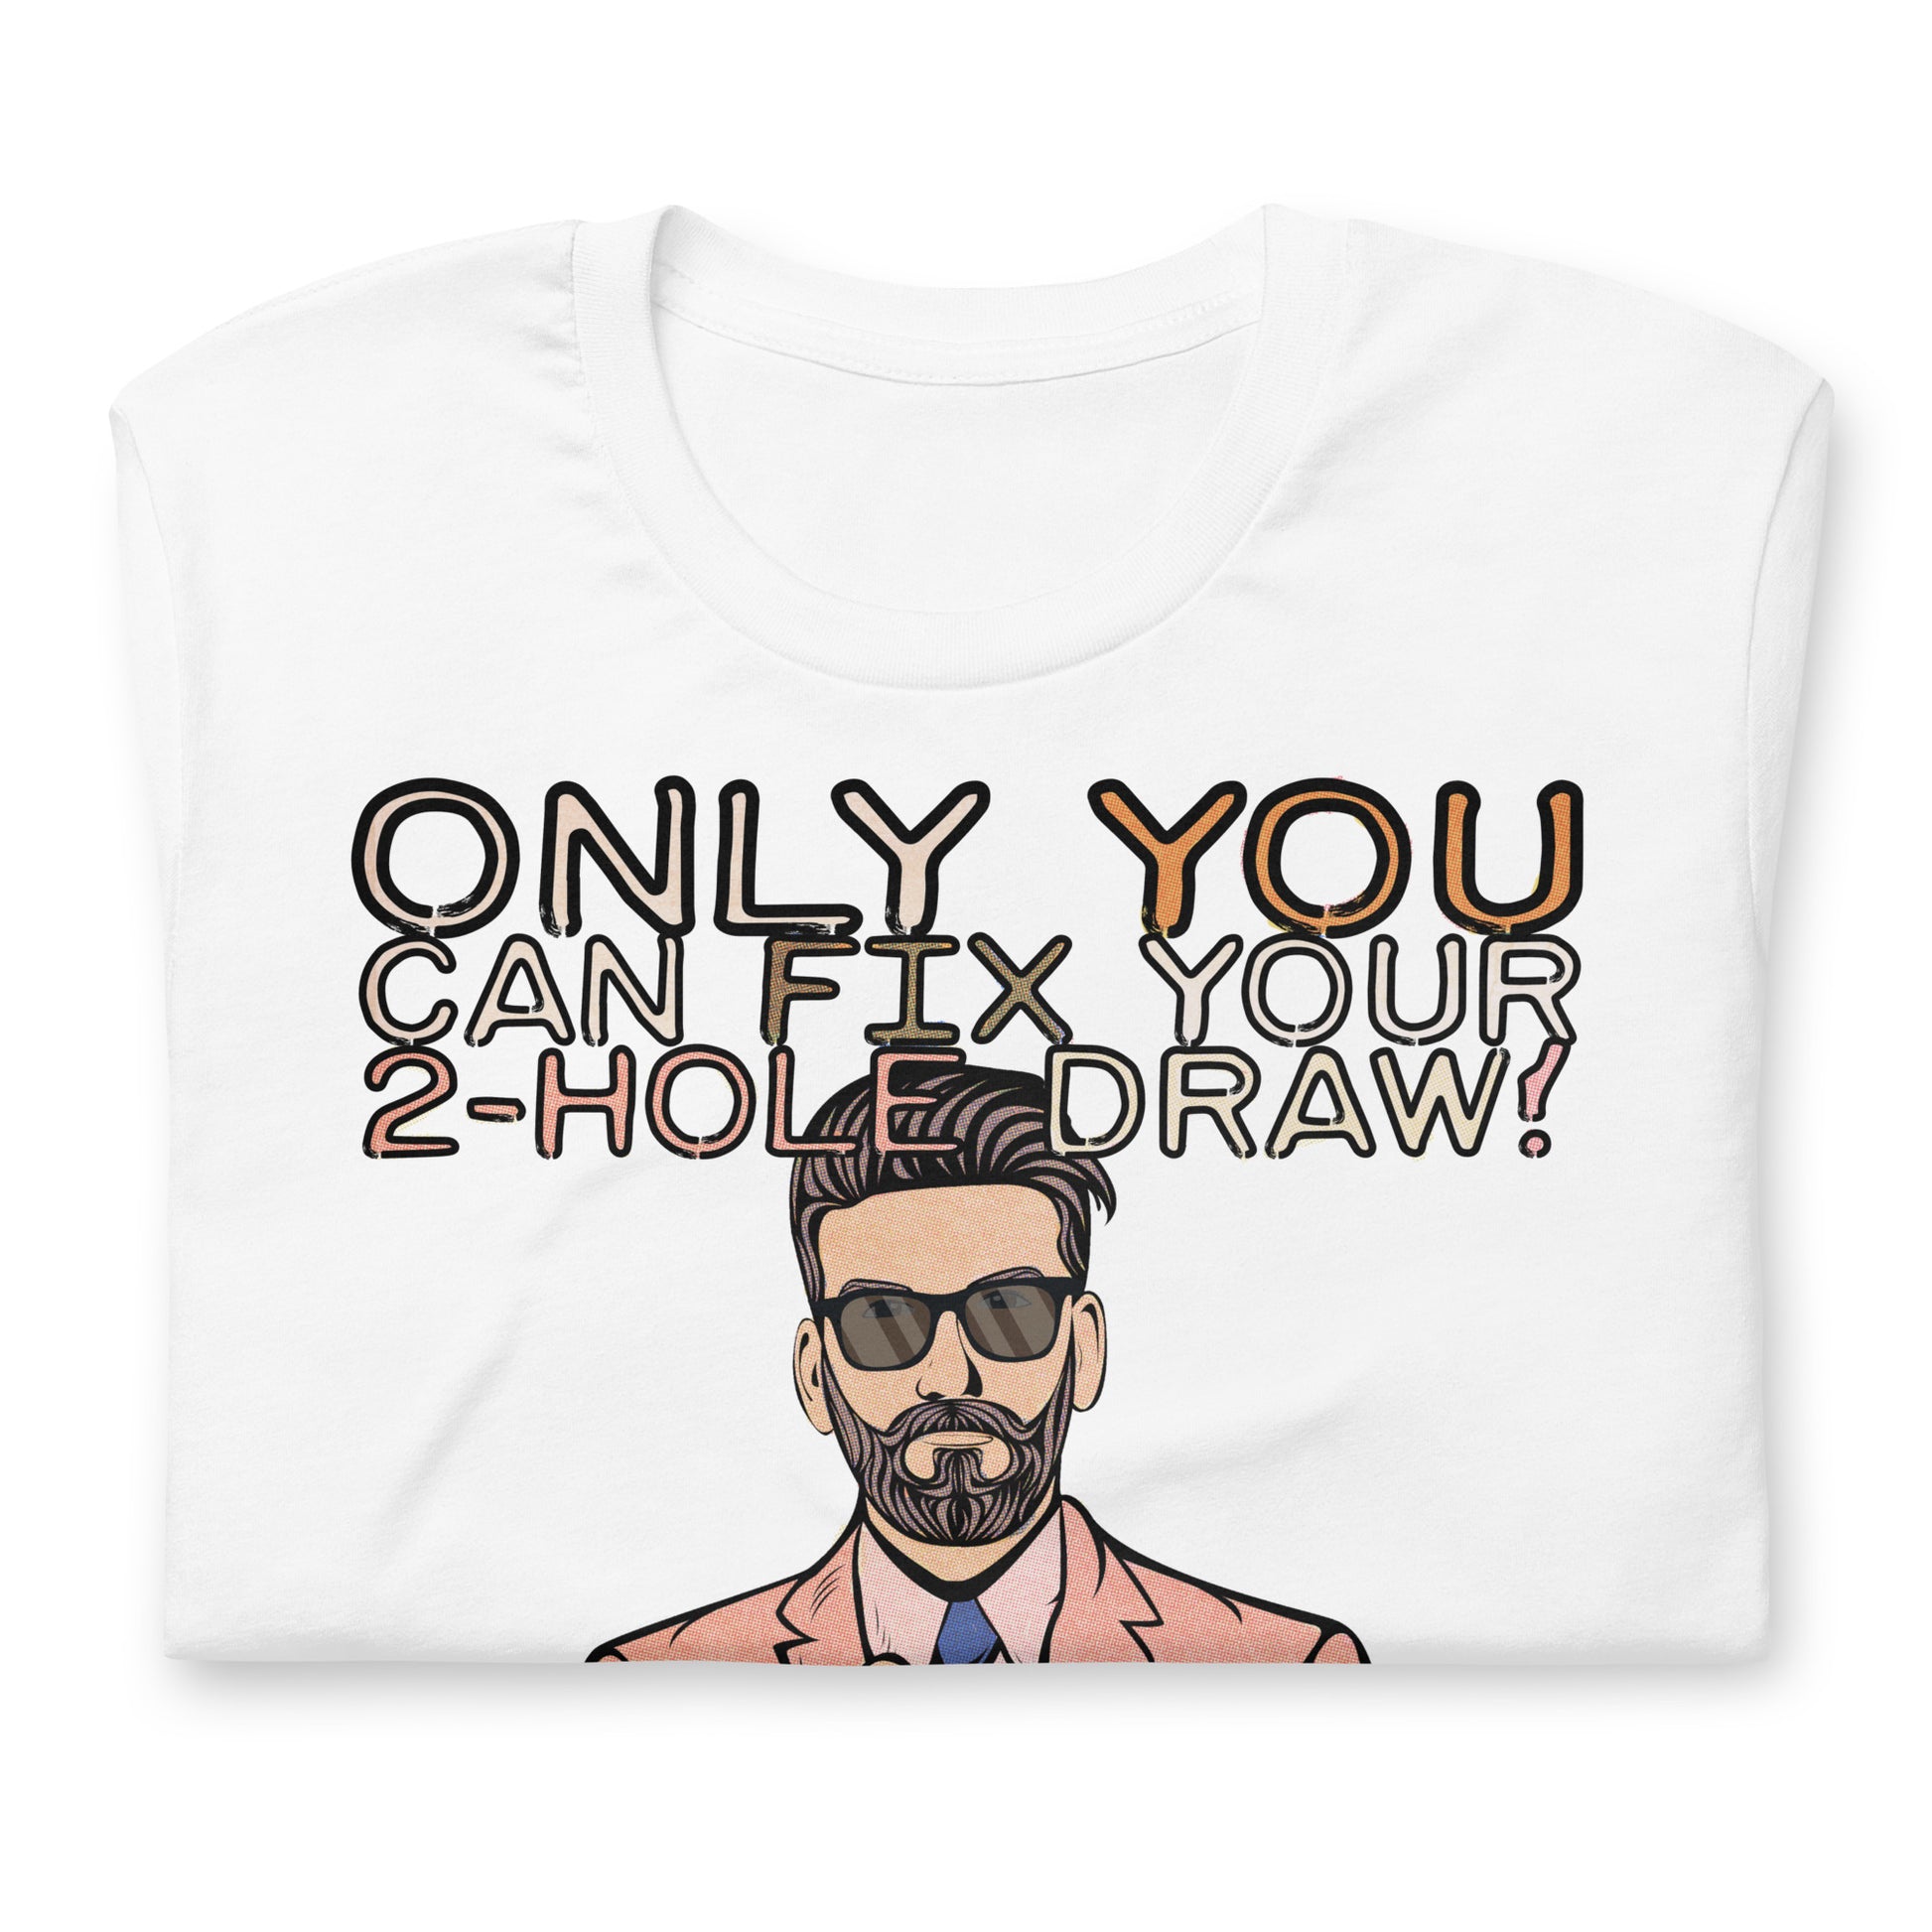 The white version of the T-Shirt, folded up on a white table.. The shirt reads, "Only YOU can fix your 2-hole draw!" Under this text is a man in sunglasses and a pink suit and tie. You can't see the bottom half of the shirt design in this image.